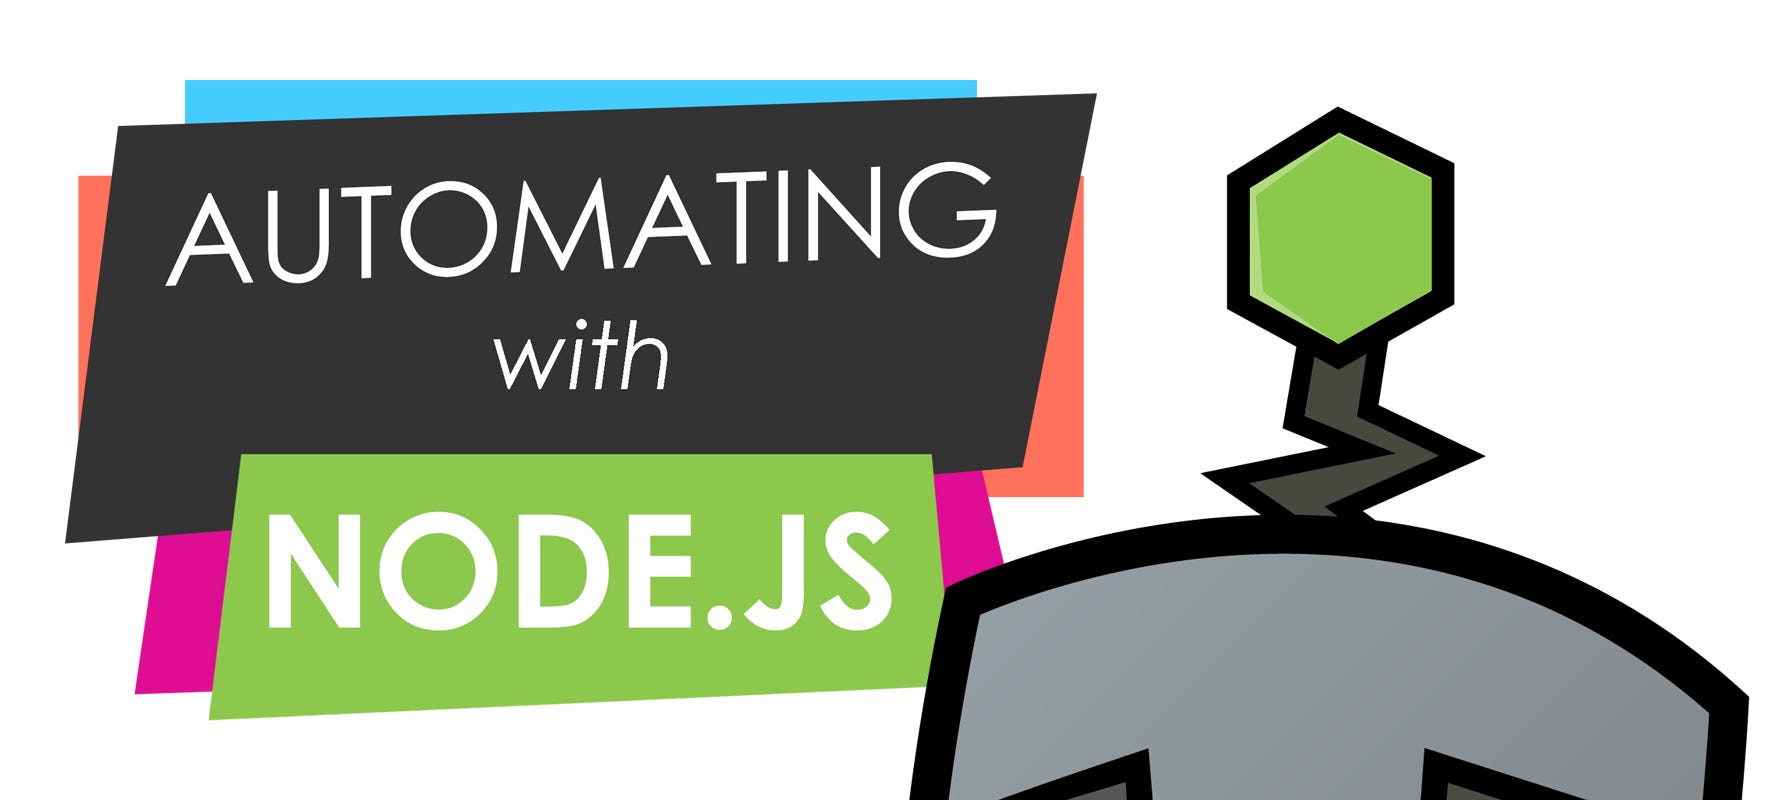 How I Automated My Job With Node Js By Shaun Michael Stone Dailyjs Medium